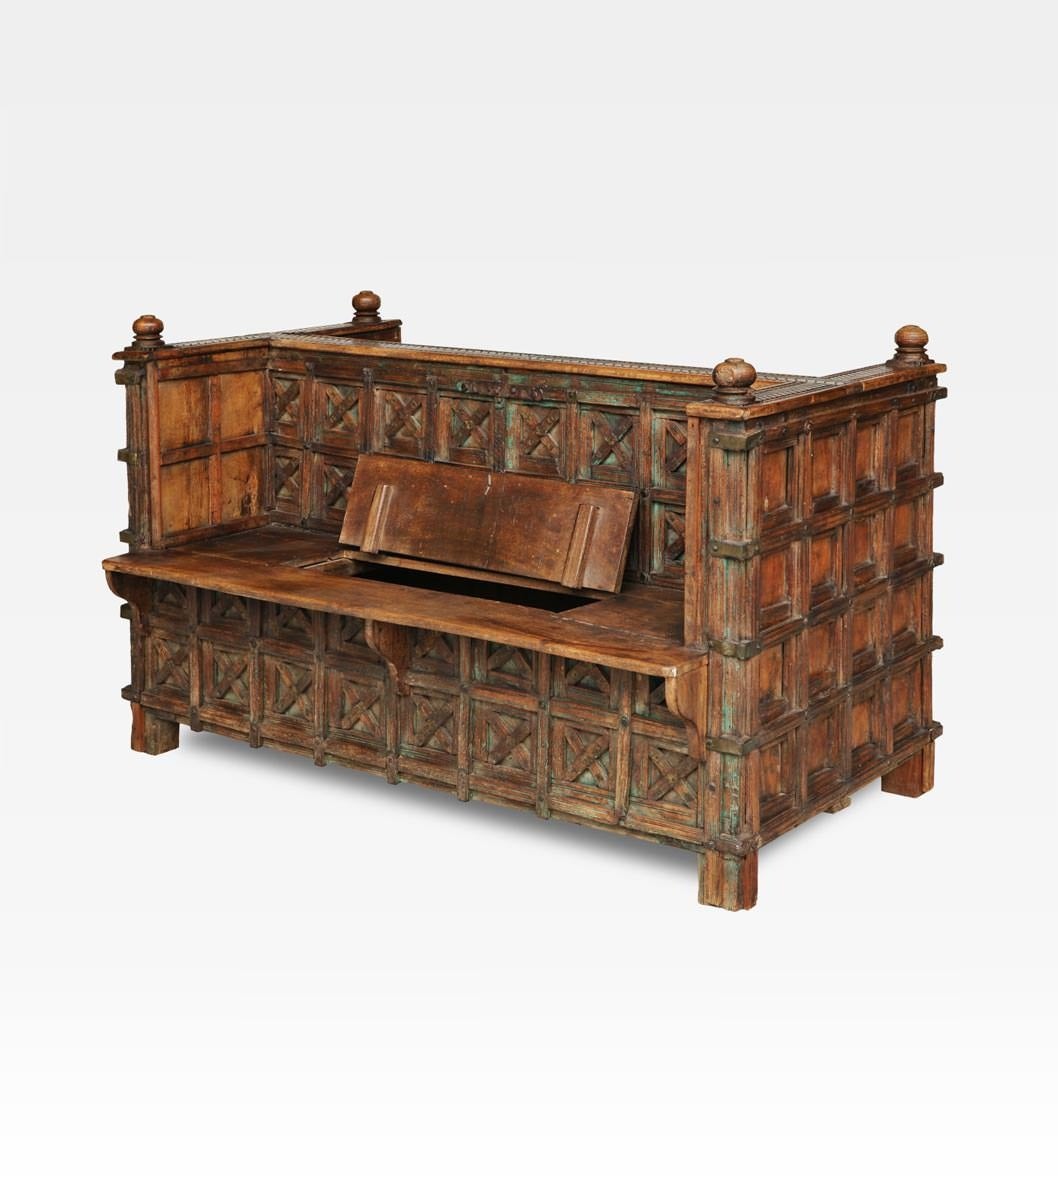 Double bench made of precious teak wood. The work-craft is typical of Mughal period, the indian gold age. Beautiful and also functional under the double seat there are two wide compartment.  A older indian version of European benches lovers. Perfect